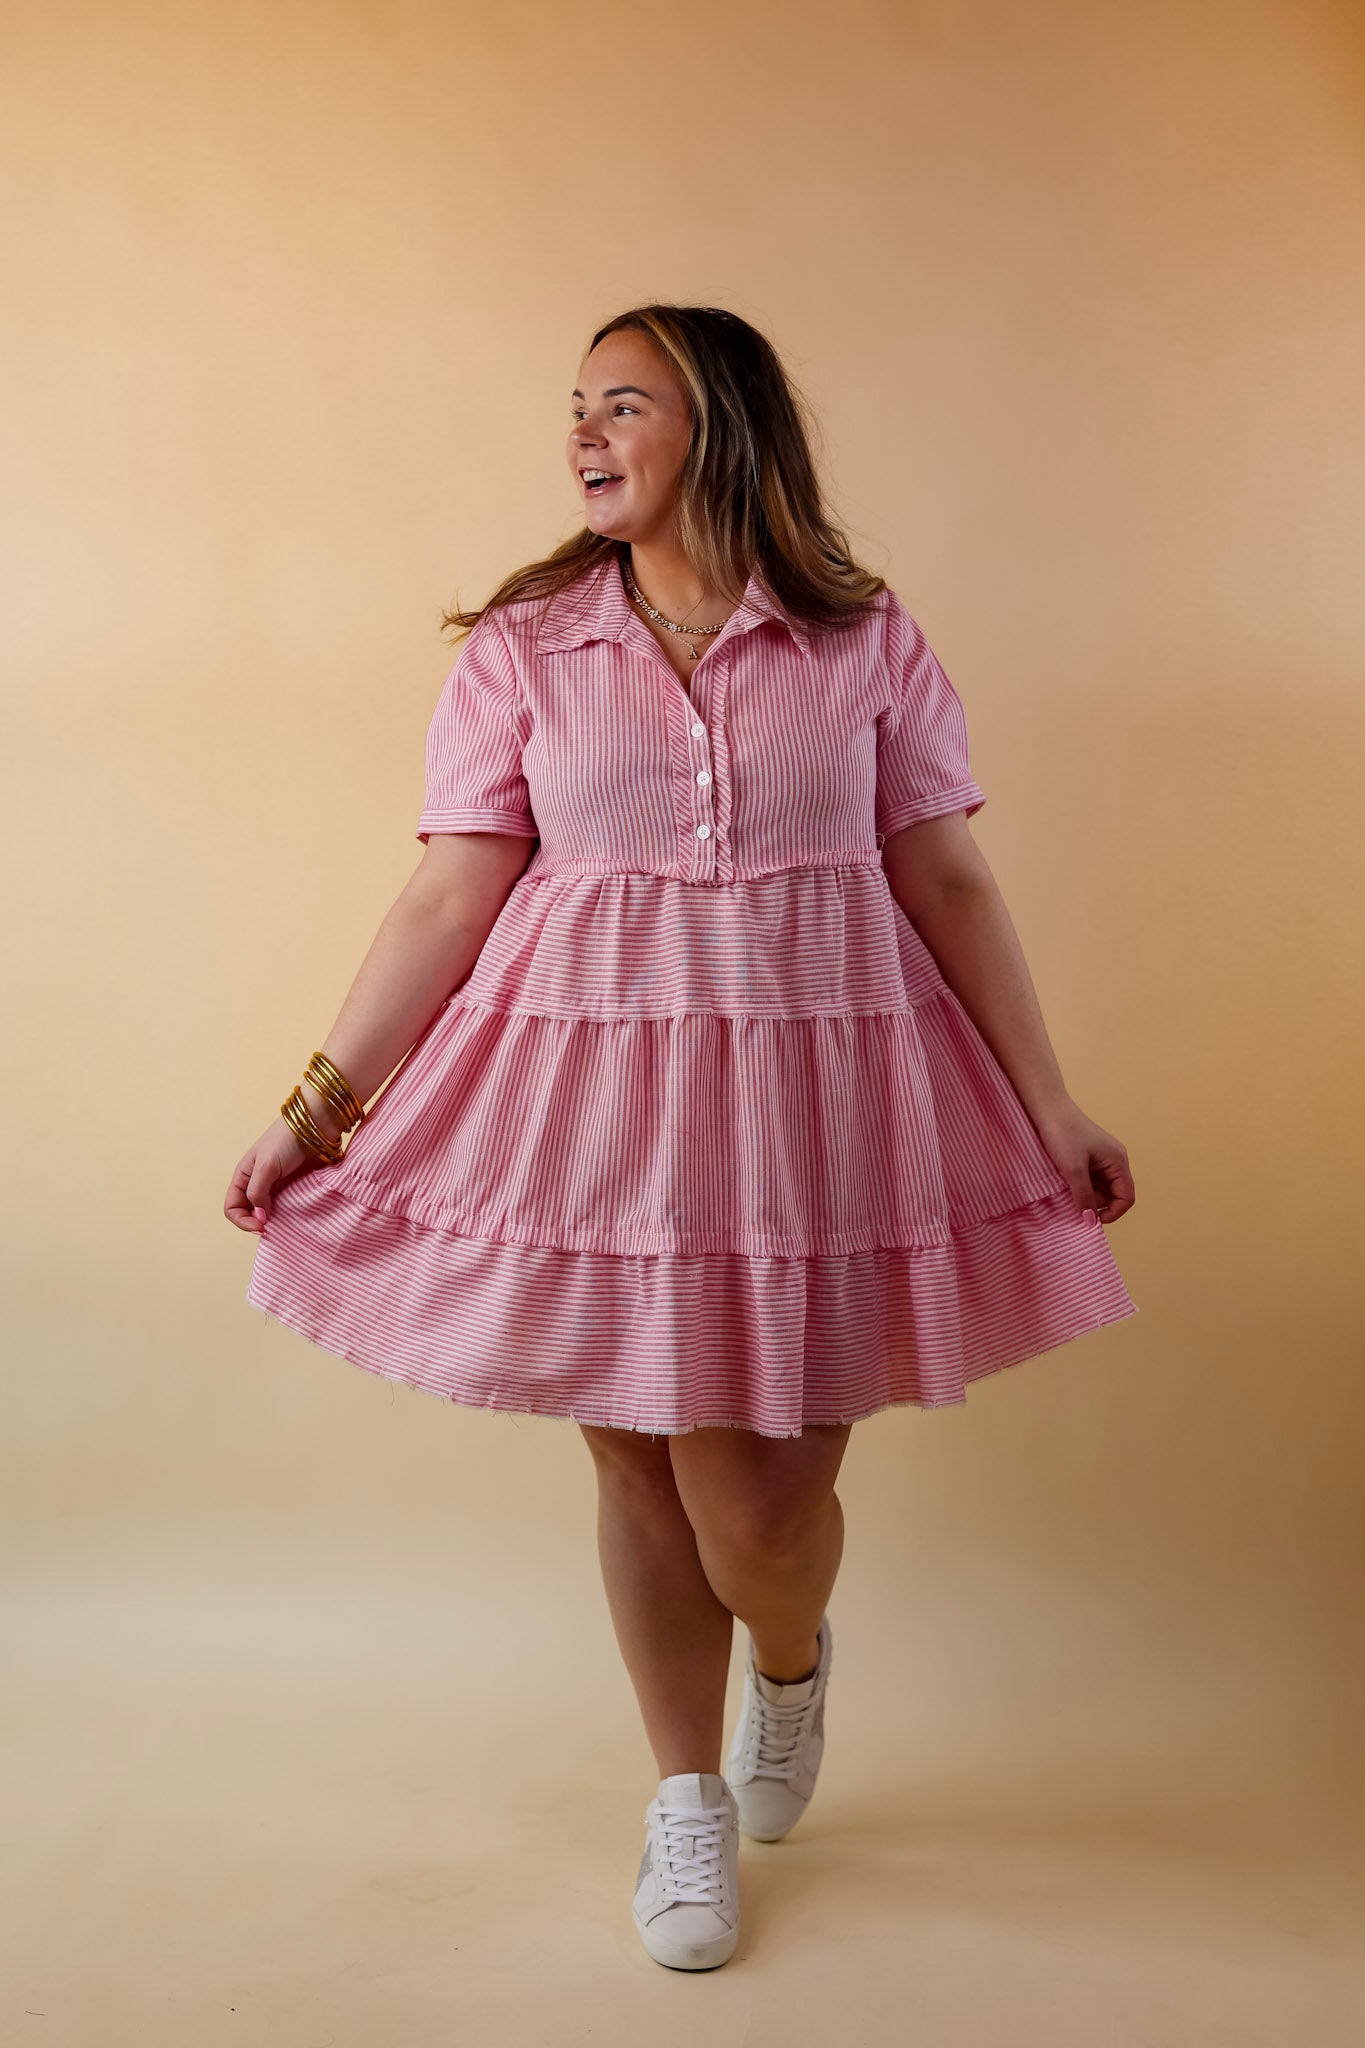 Casual Greetings Collared Pinstripe Dress in Pink and White - Giddy Up Glamour Boutique